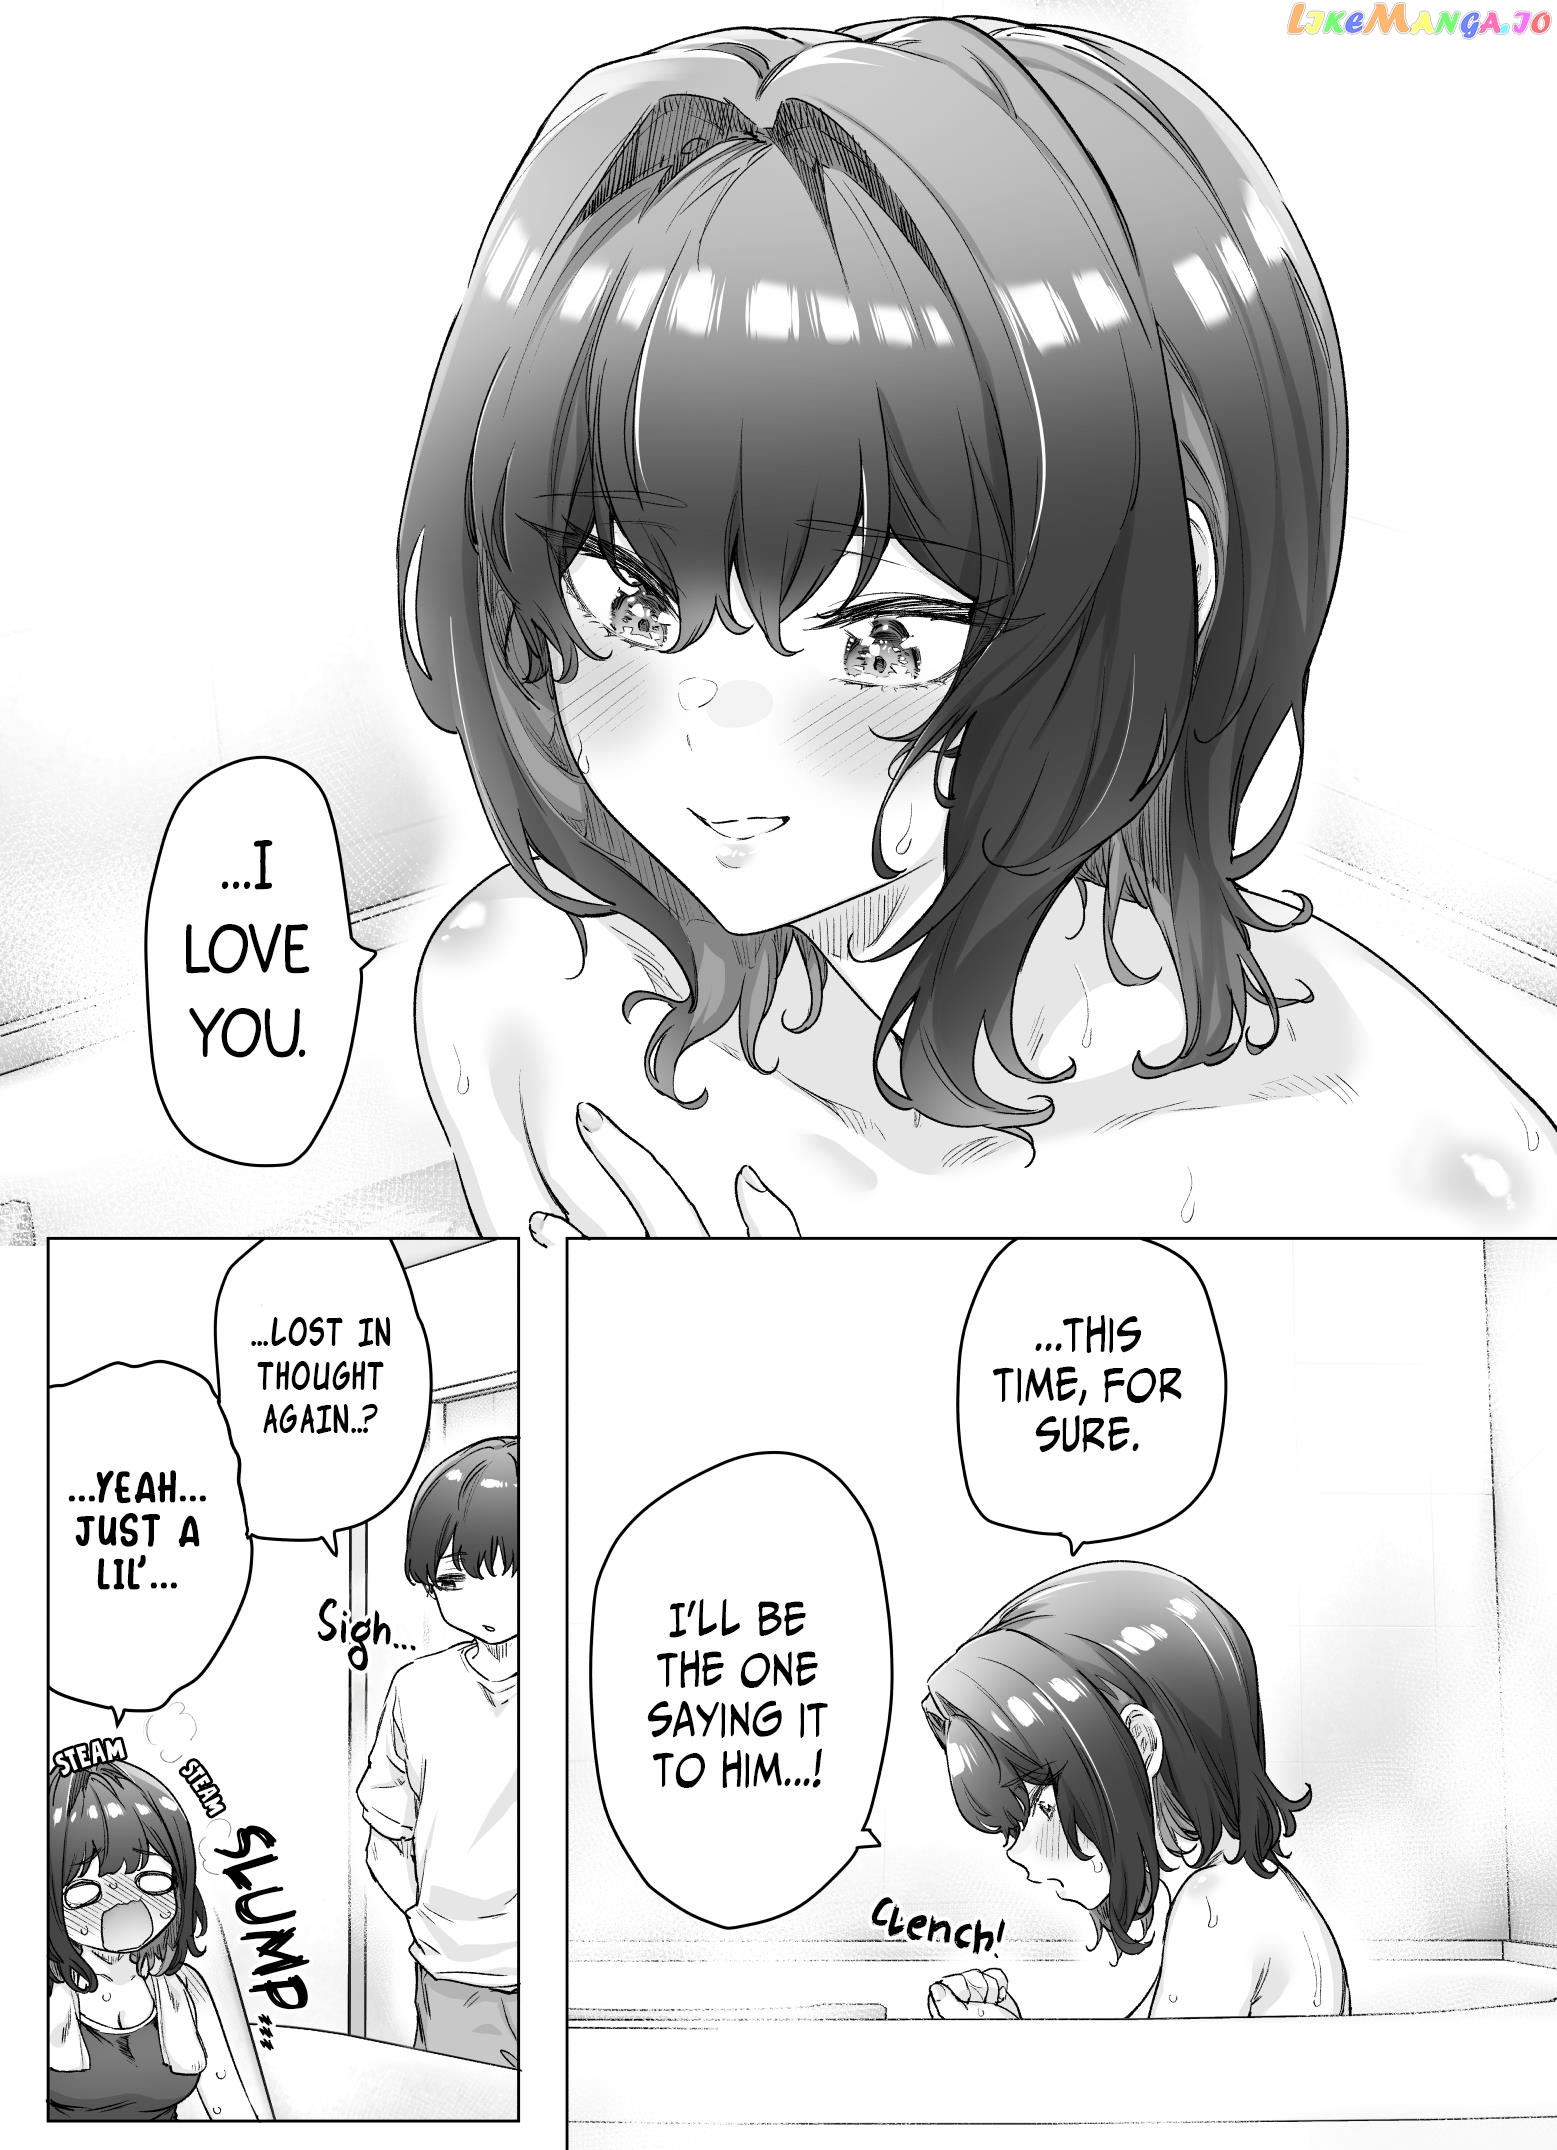 The Tsuntsuntsuntsuntsuntsun Tsuntsuntsuntsuntsundere Girl Getting Less And Less Tsun Day By Day chapter 104 - page 2